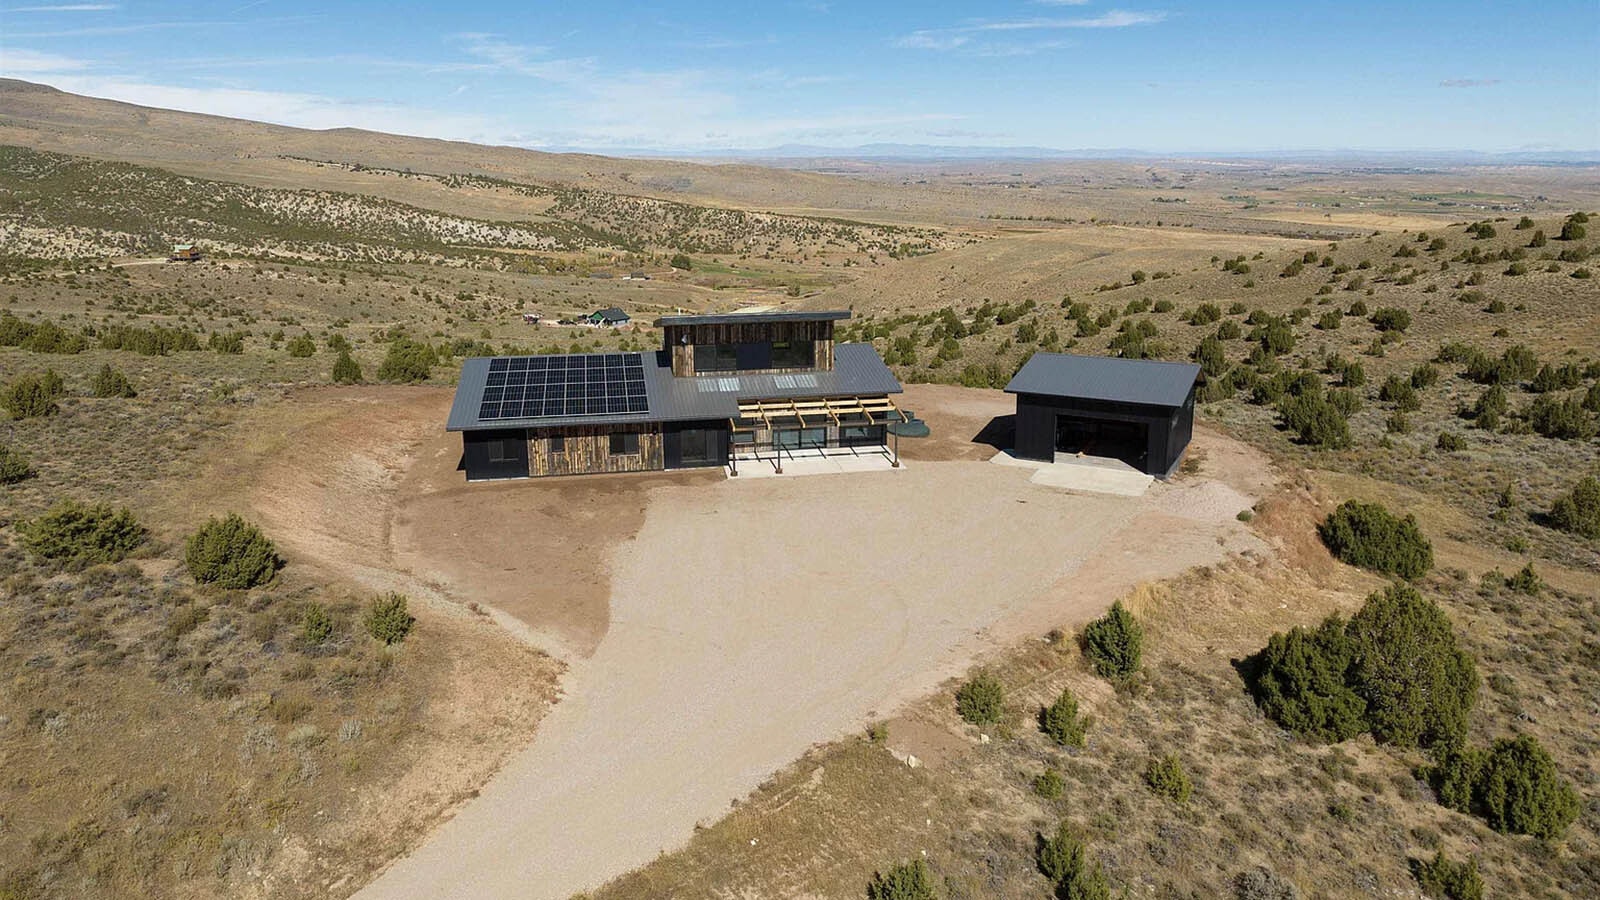 The net zero home has a large bank of solar panels on the roof.